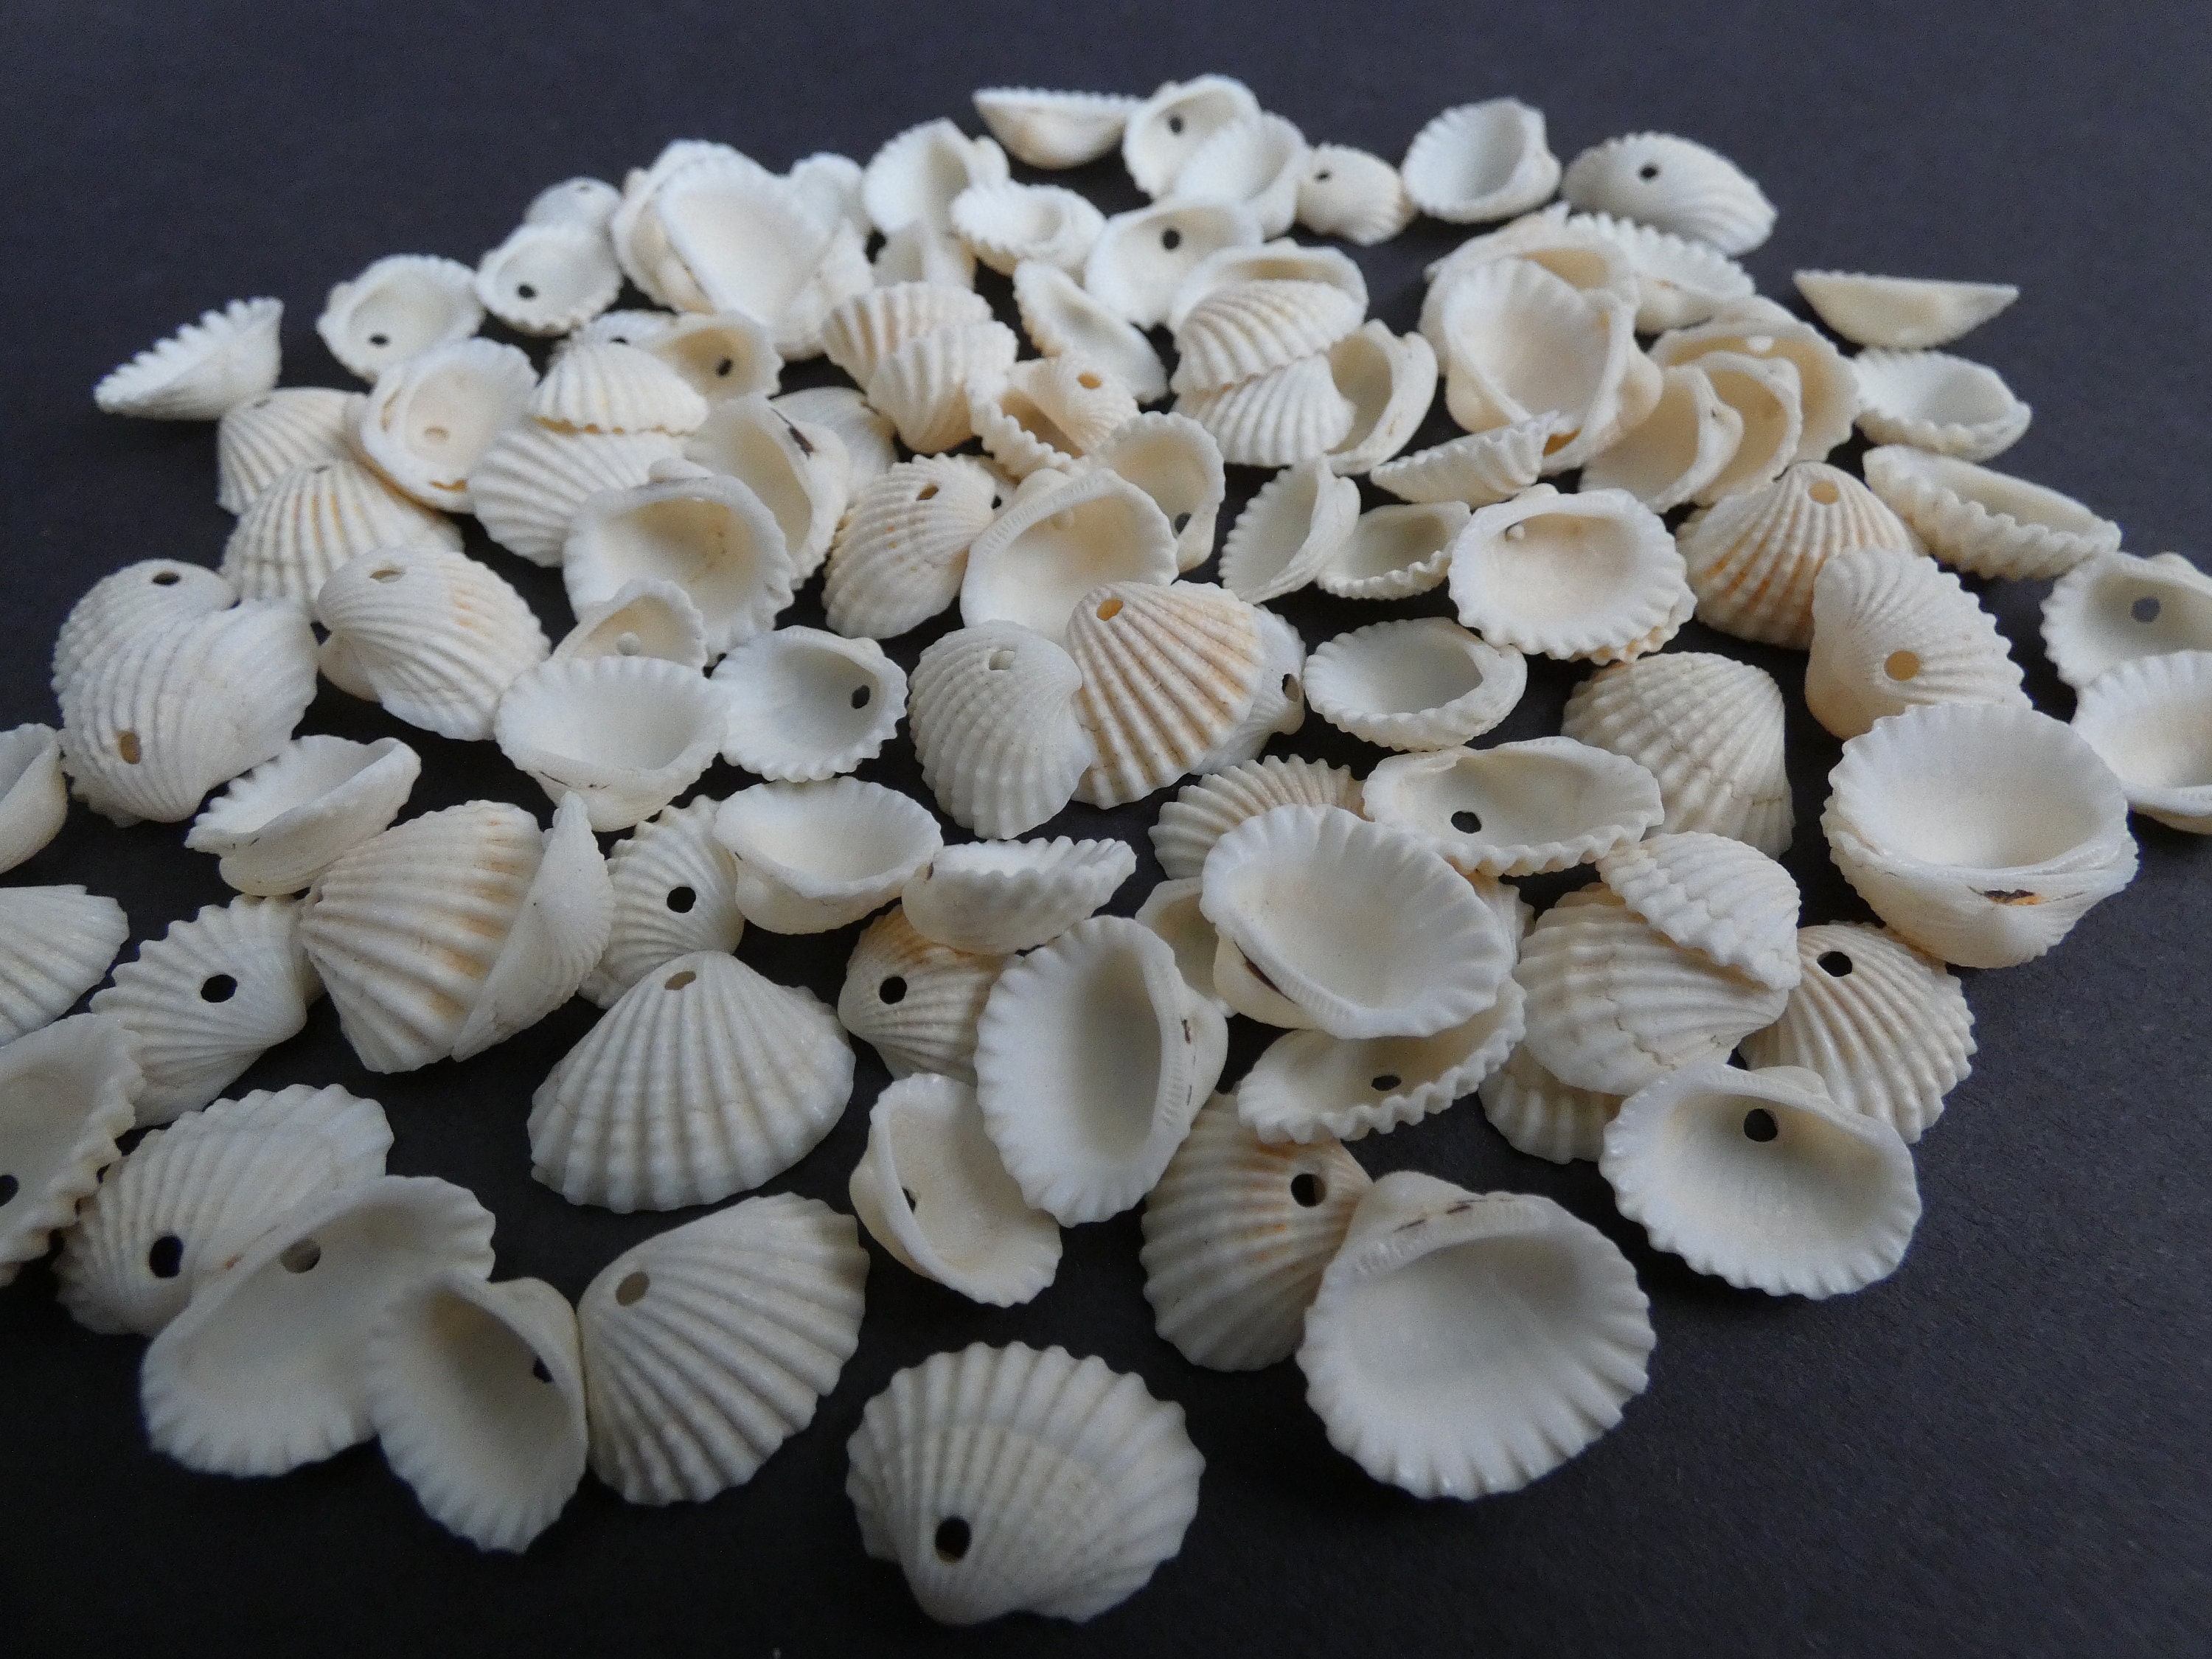 1pcs Natural Sea Shell Bead White Yellow Black Carving Butterfly